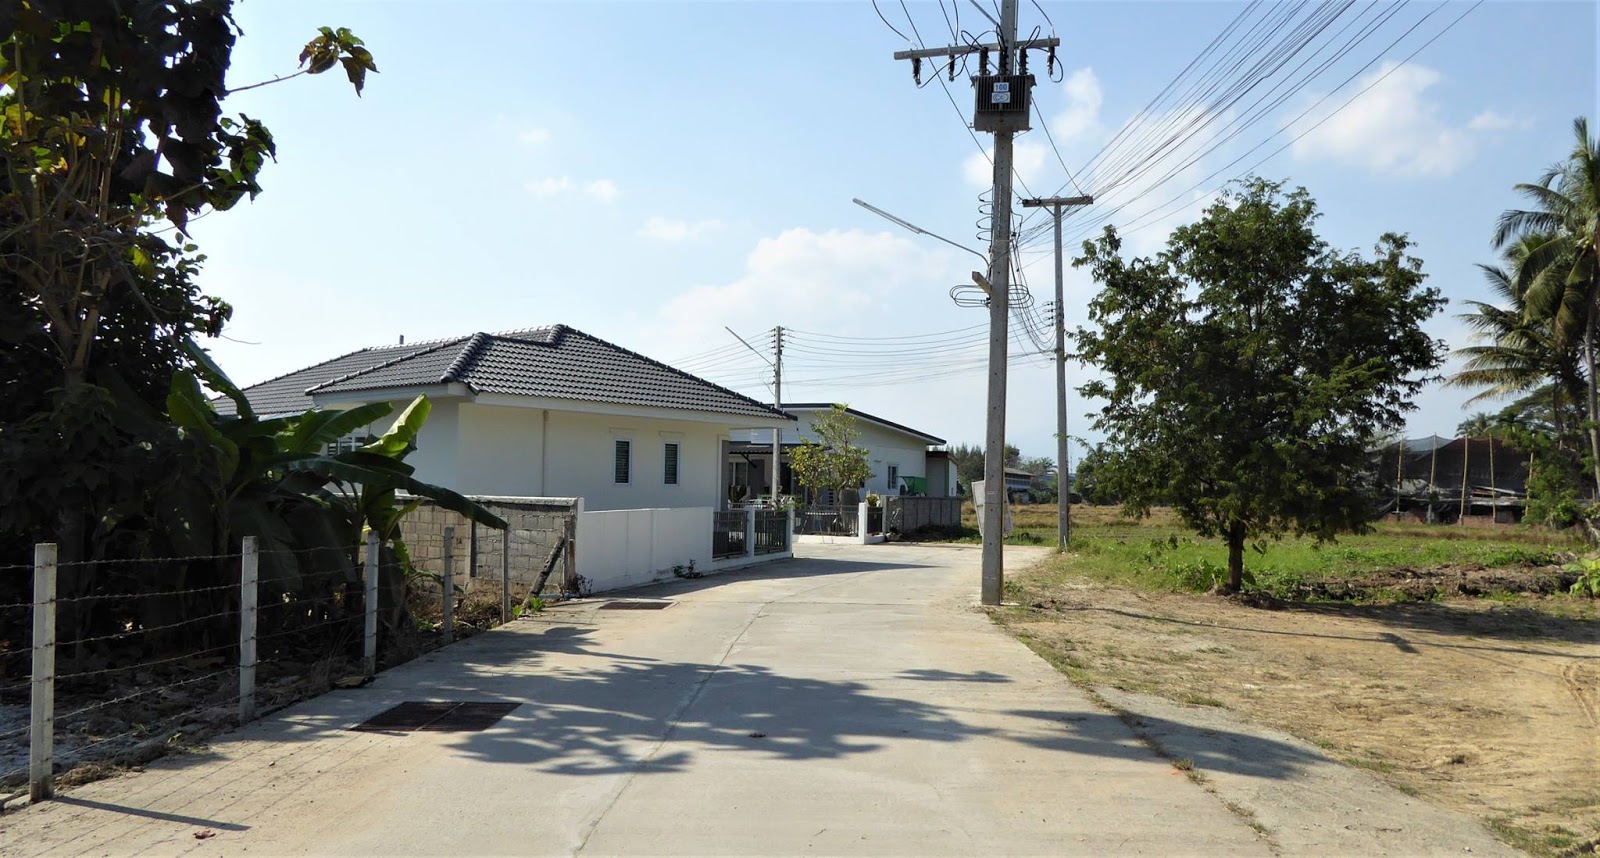 These three bungalow house plan consists of 1-3 bedrooms, 1-2 bathroom, kitchen, a living room and a terrace outside. With a living area of approximately under 115 square meters in construction costs more than 670,000 baht (19,400 USD)